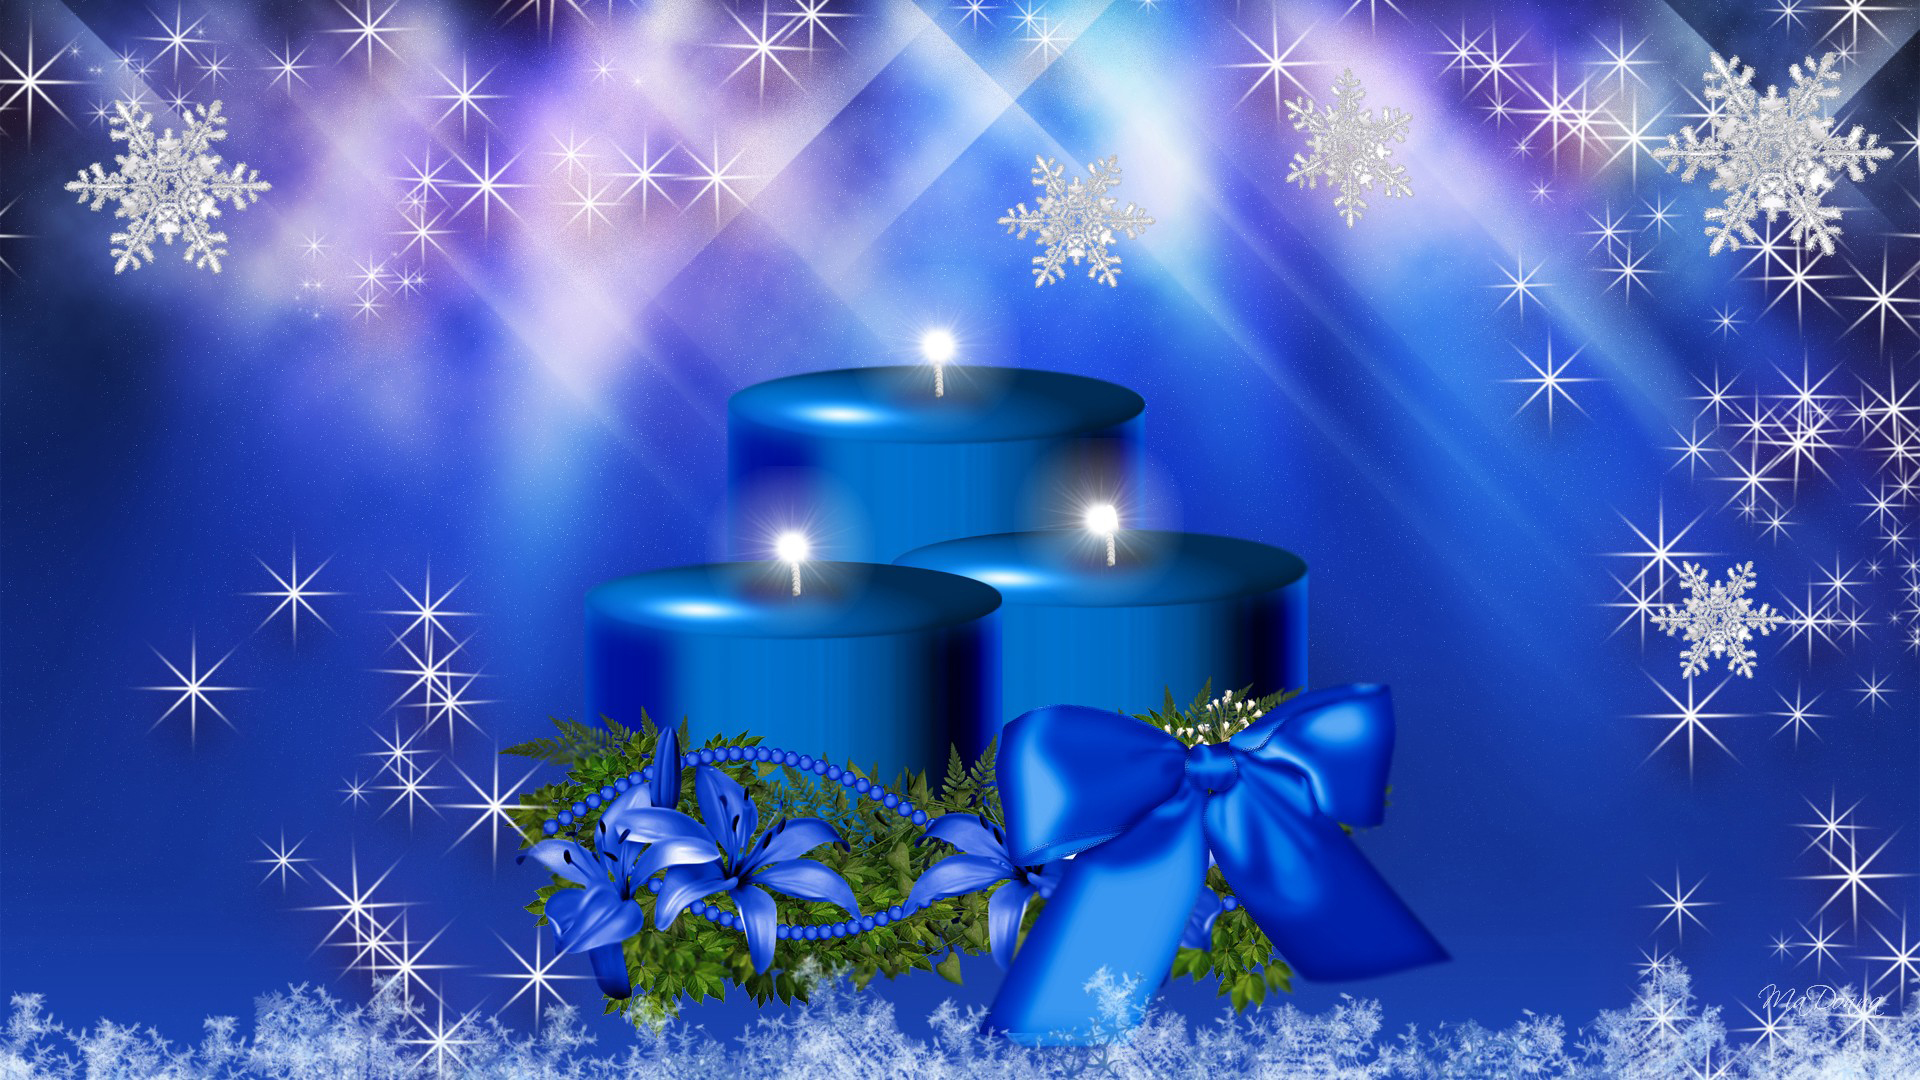 Blue Candle Christmas Decoration Snowflake With Stars 2K Snowflake